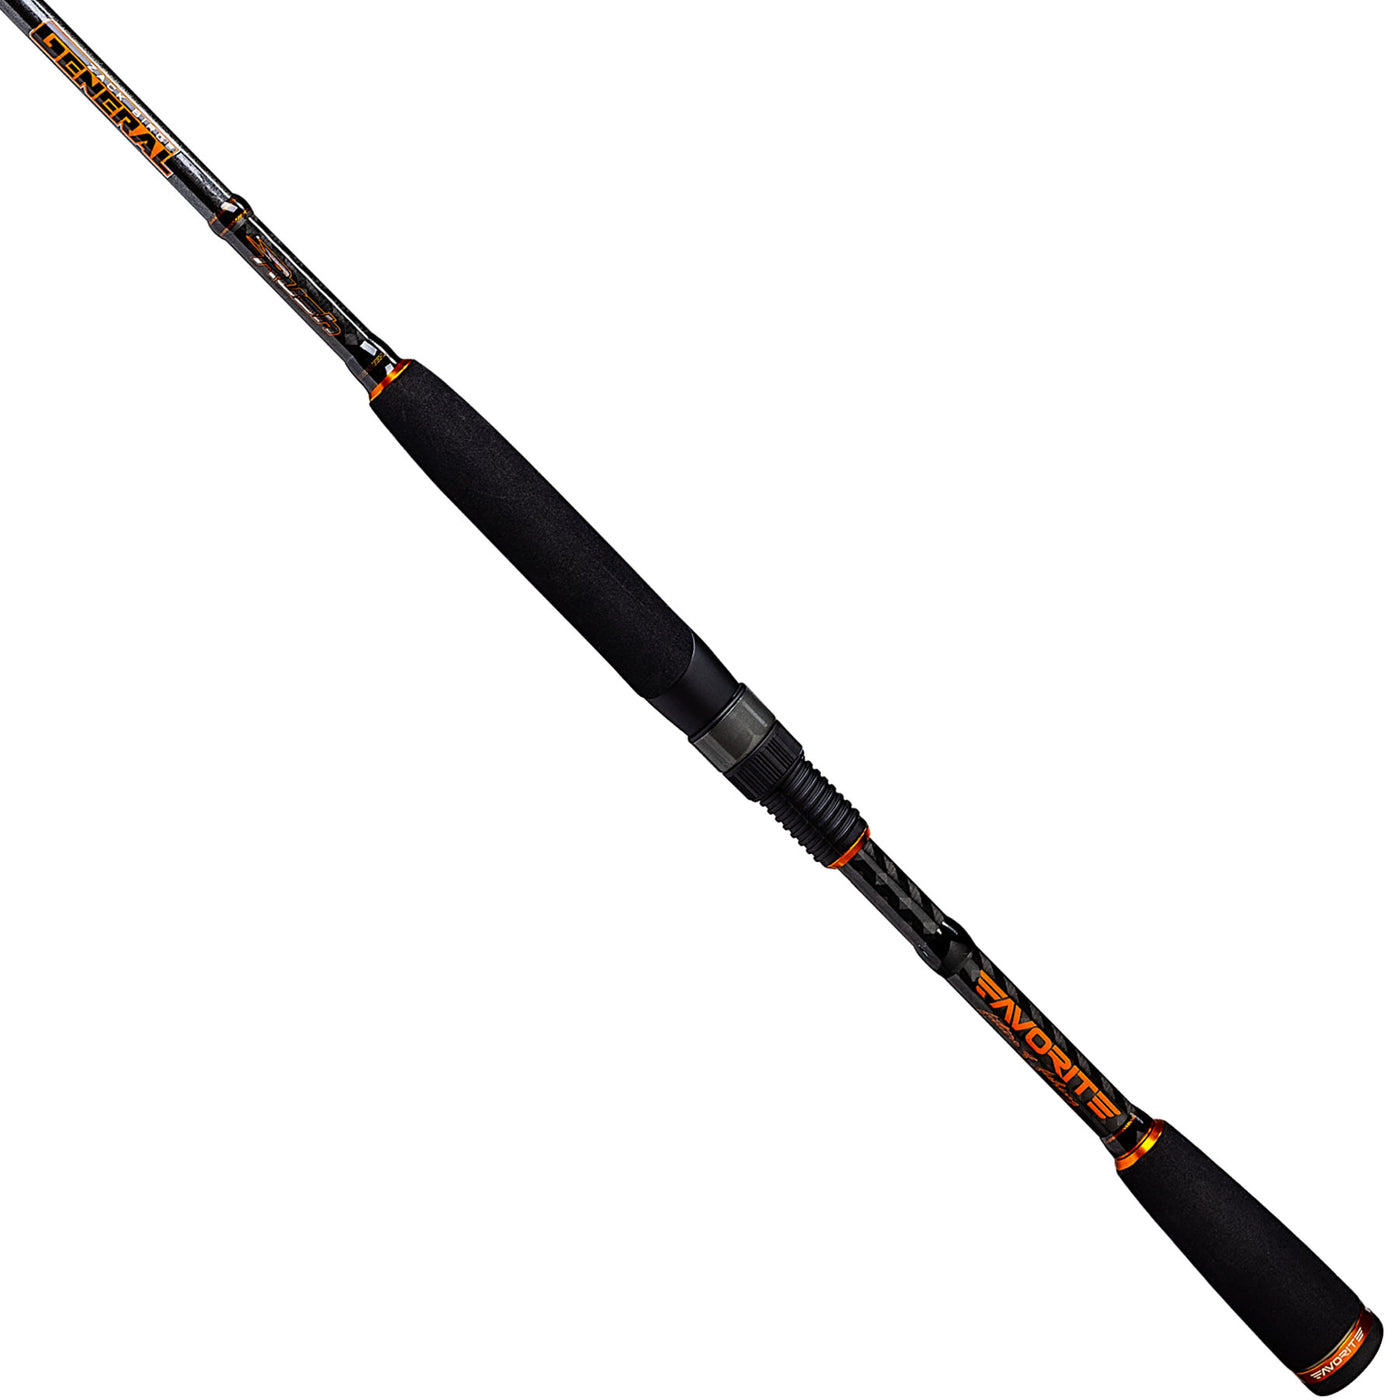 Signature Series: Zack Birge Casting and Spinning Rods